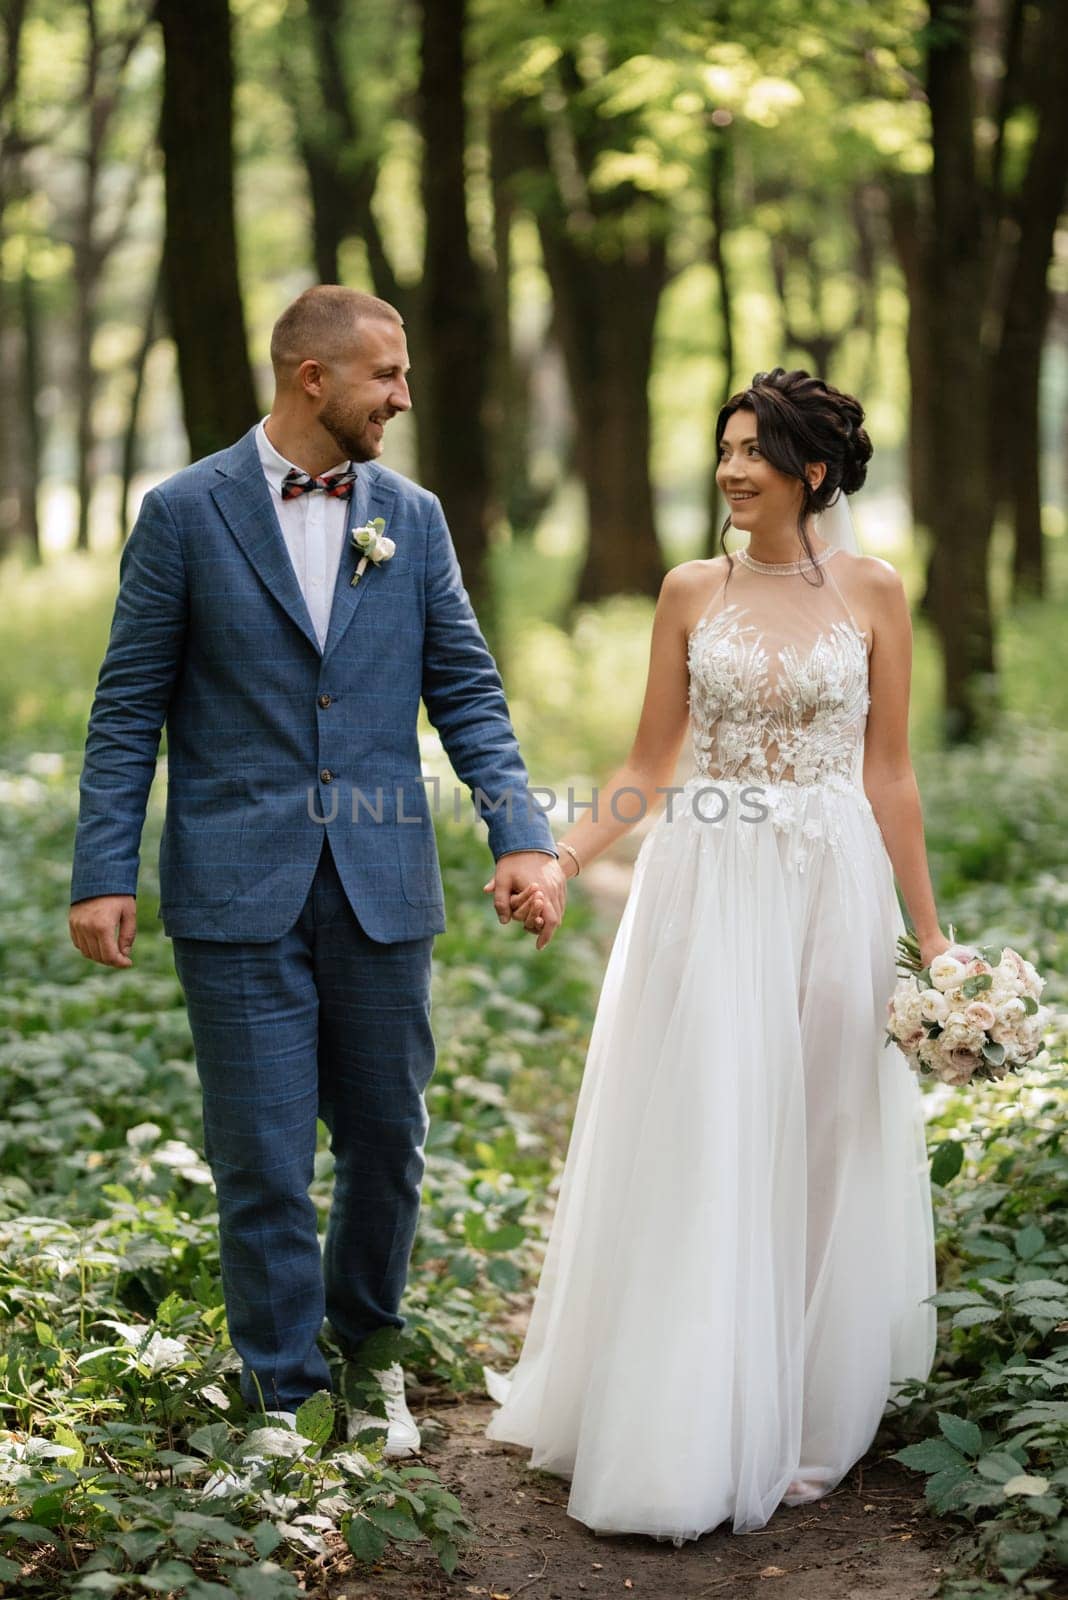 wedding walk of the bride and groom in the deciduous forest in summer by Andreua